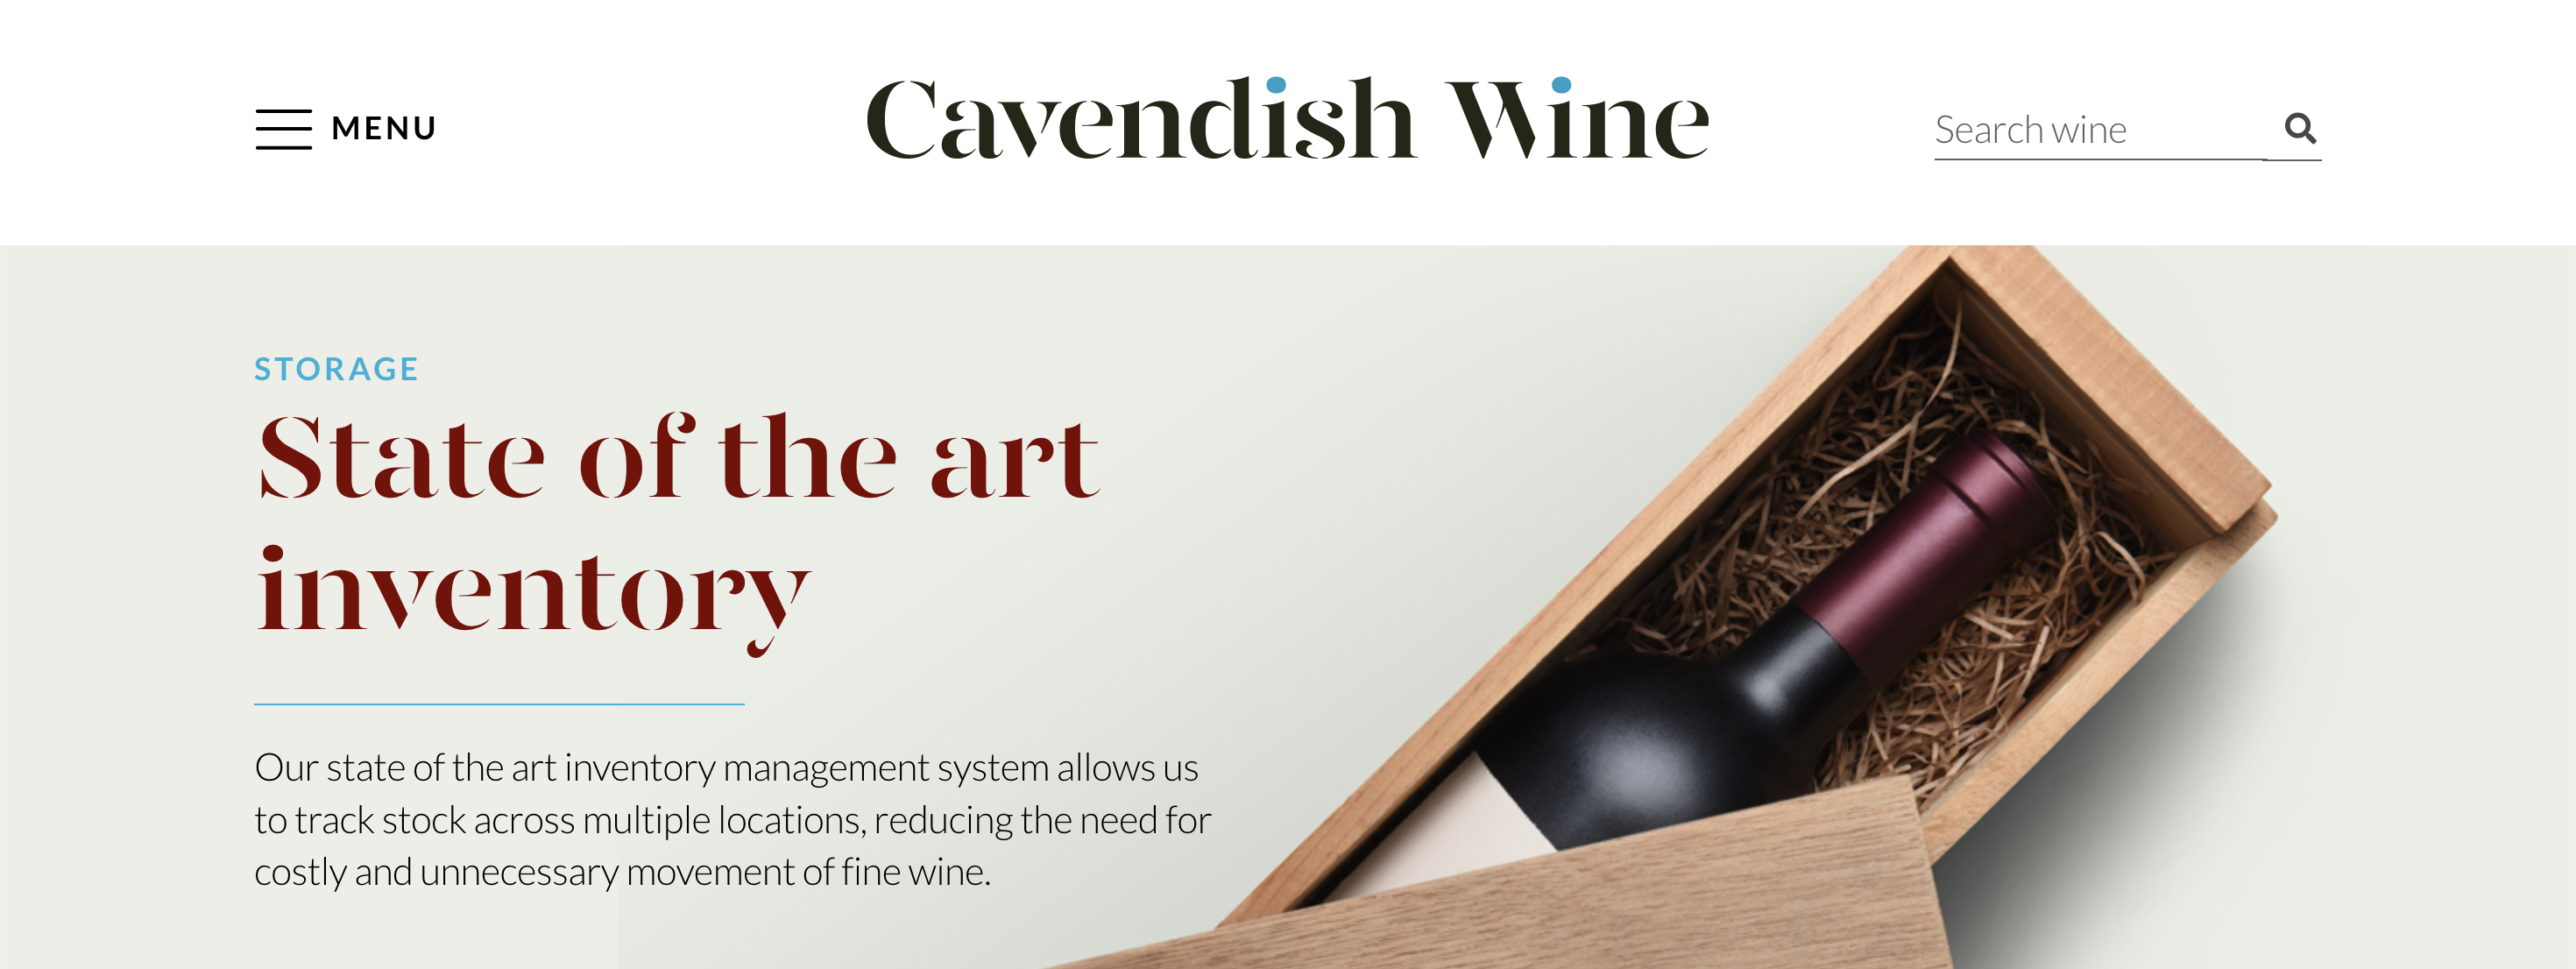 banner from Cavendish Wine website